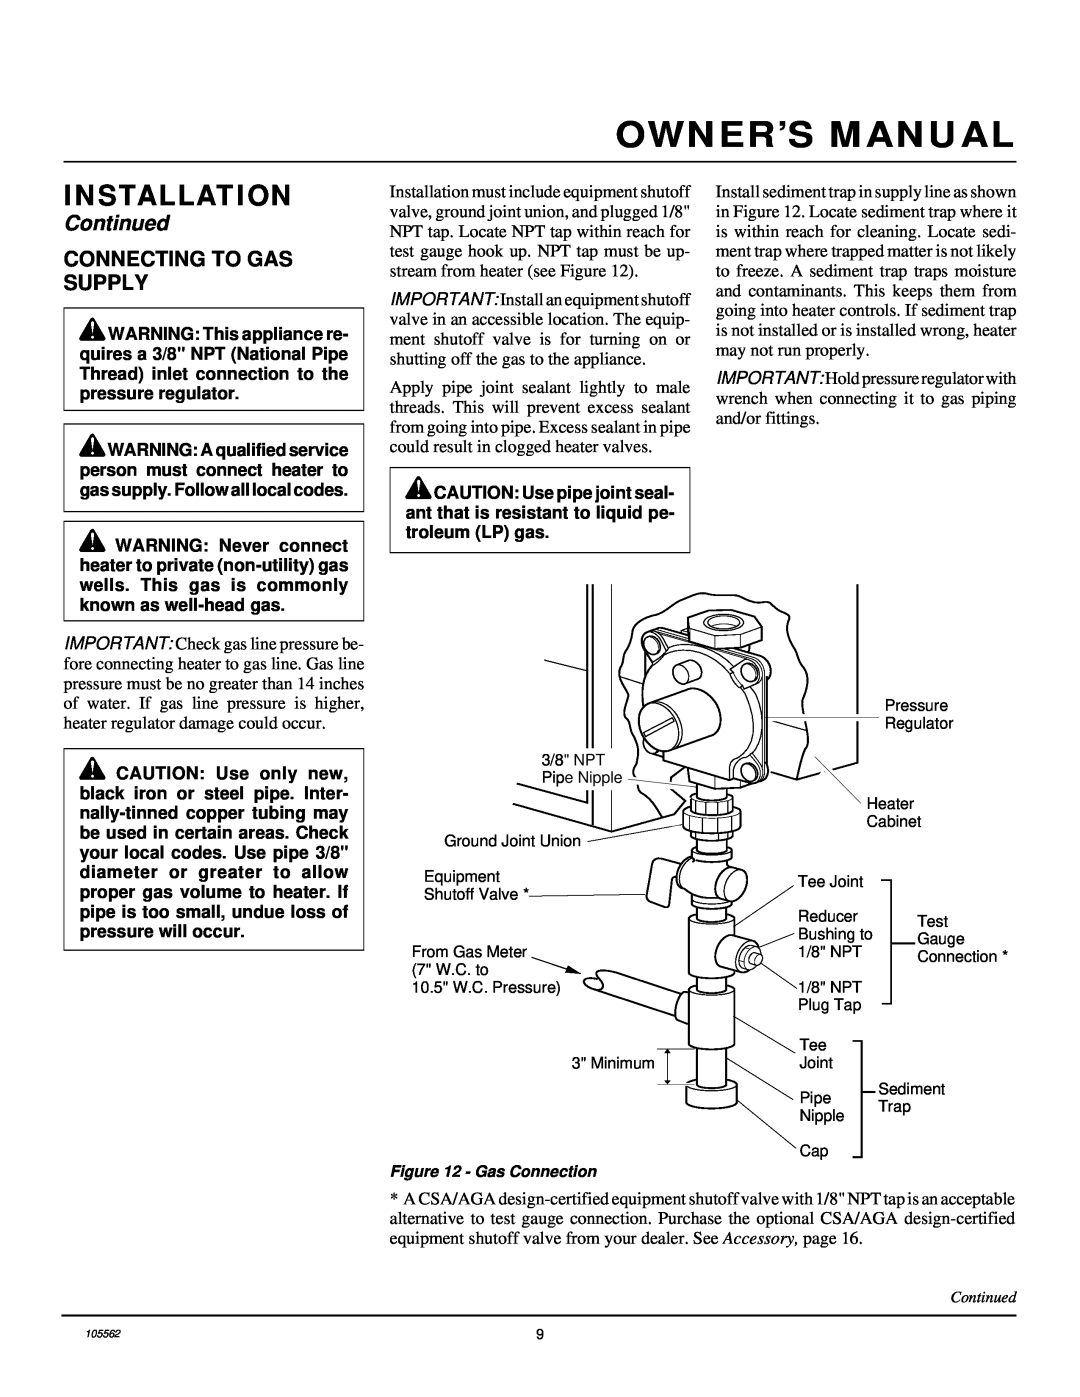 Desa FA-2B installation manual Owner’S Manual, Installation, Continued, Connecting To Gas Supply, Gas Connection 